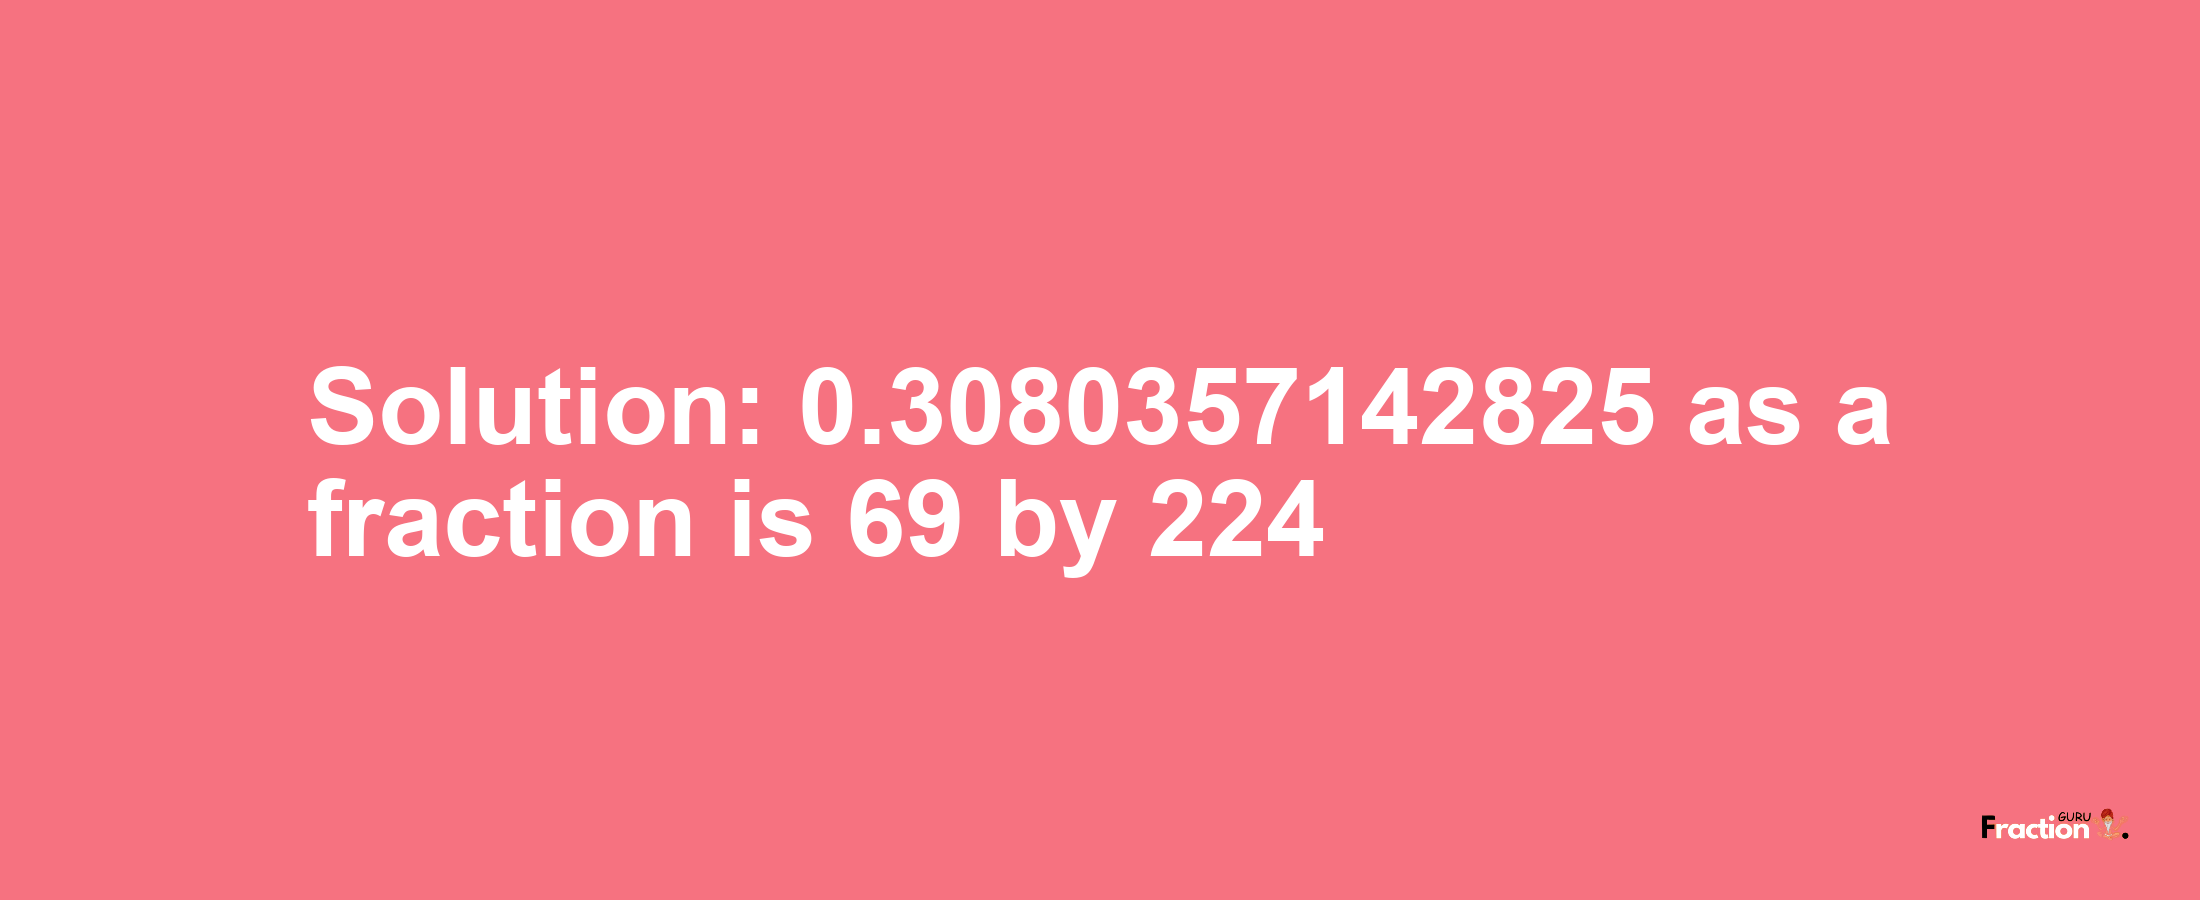 Solution:0.3080357142825 as a fraction is 69/224